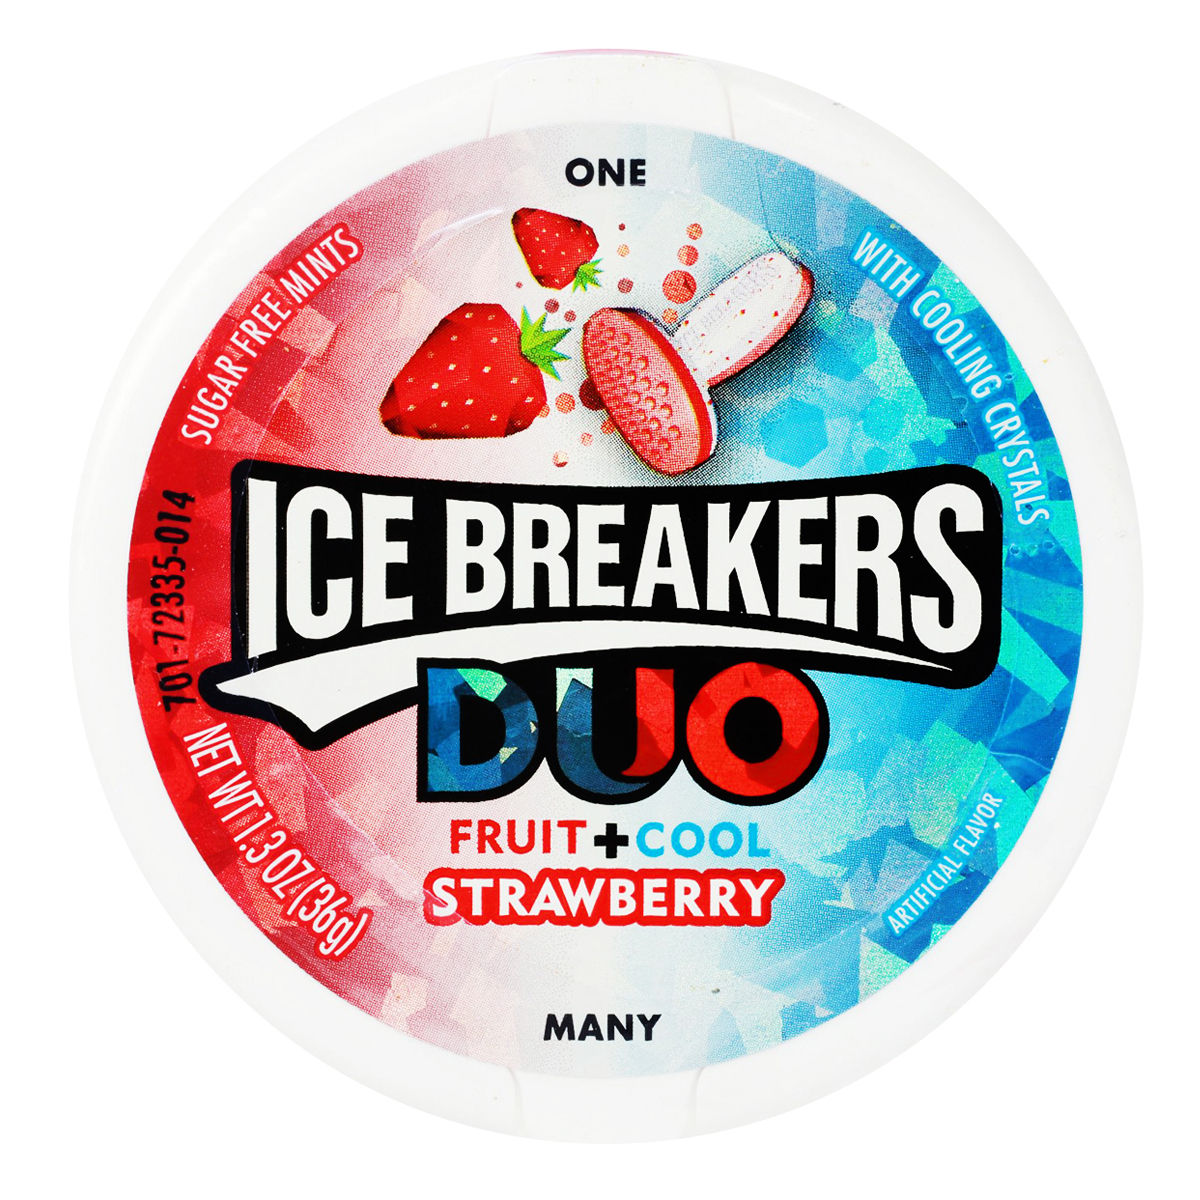 Buy Ice Breakers Duo Fruit + Cool Strawberry Sugar Free Mouth Freshner Mints, 36 gm Online